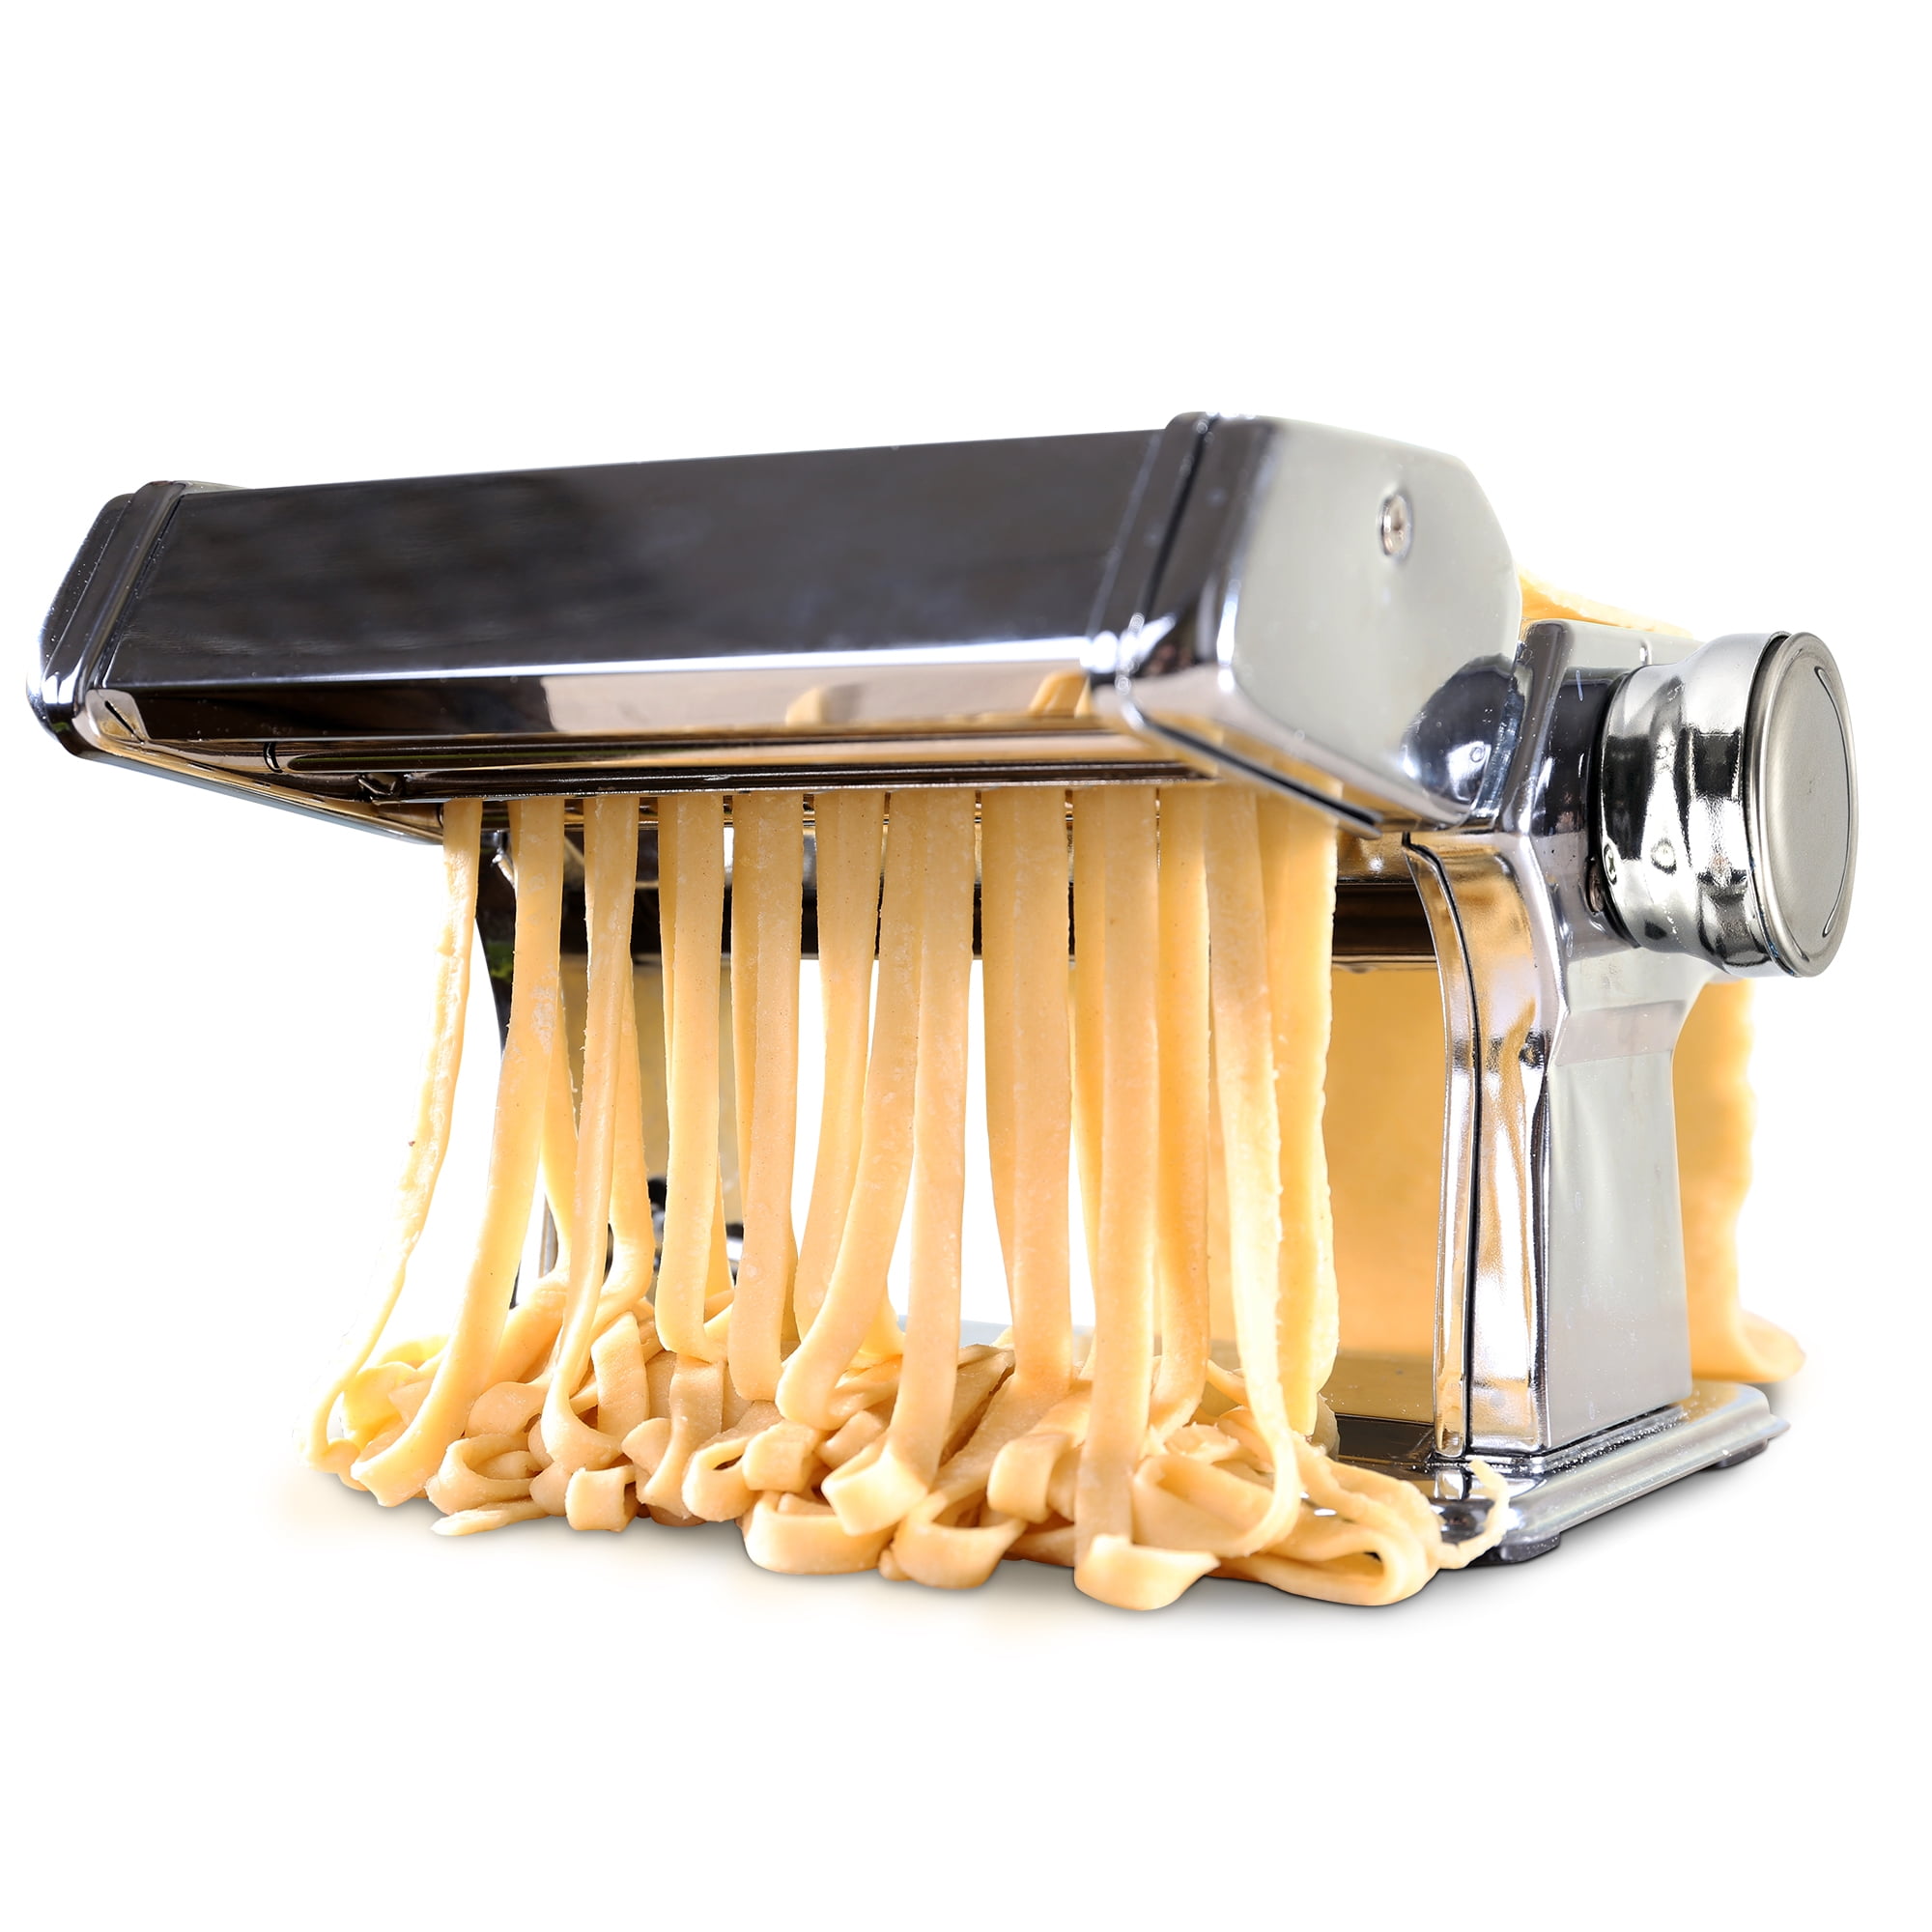 Spaghetti or Fettuccine By Cook’s Aid Roller Pasta Maker Pasta Maker Machine 7 Adjustable Thickness Settings Manual Noodles Maker with Removable Handle Lasagna Perfect for Homemade Pasta